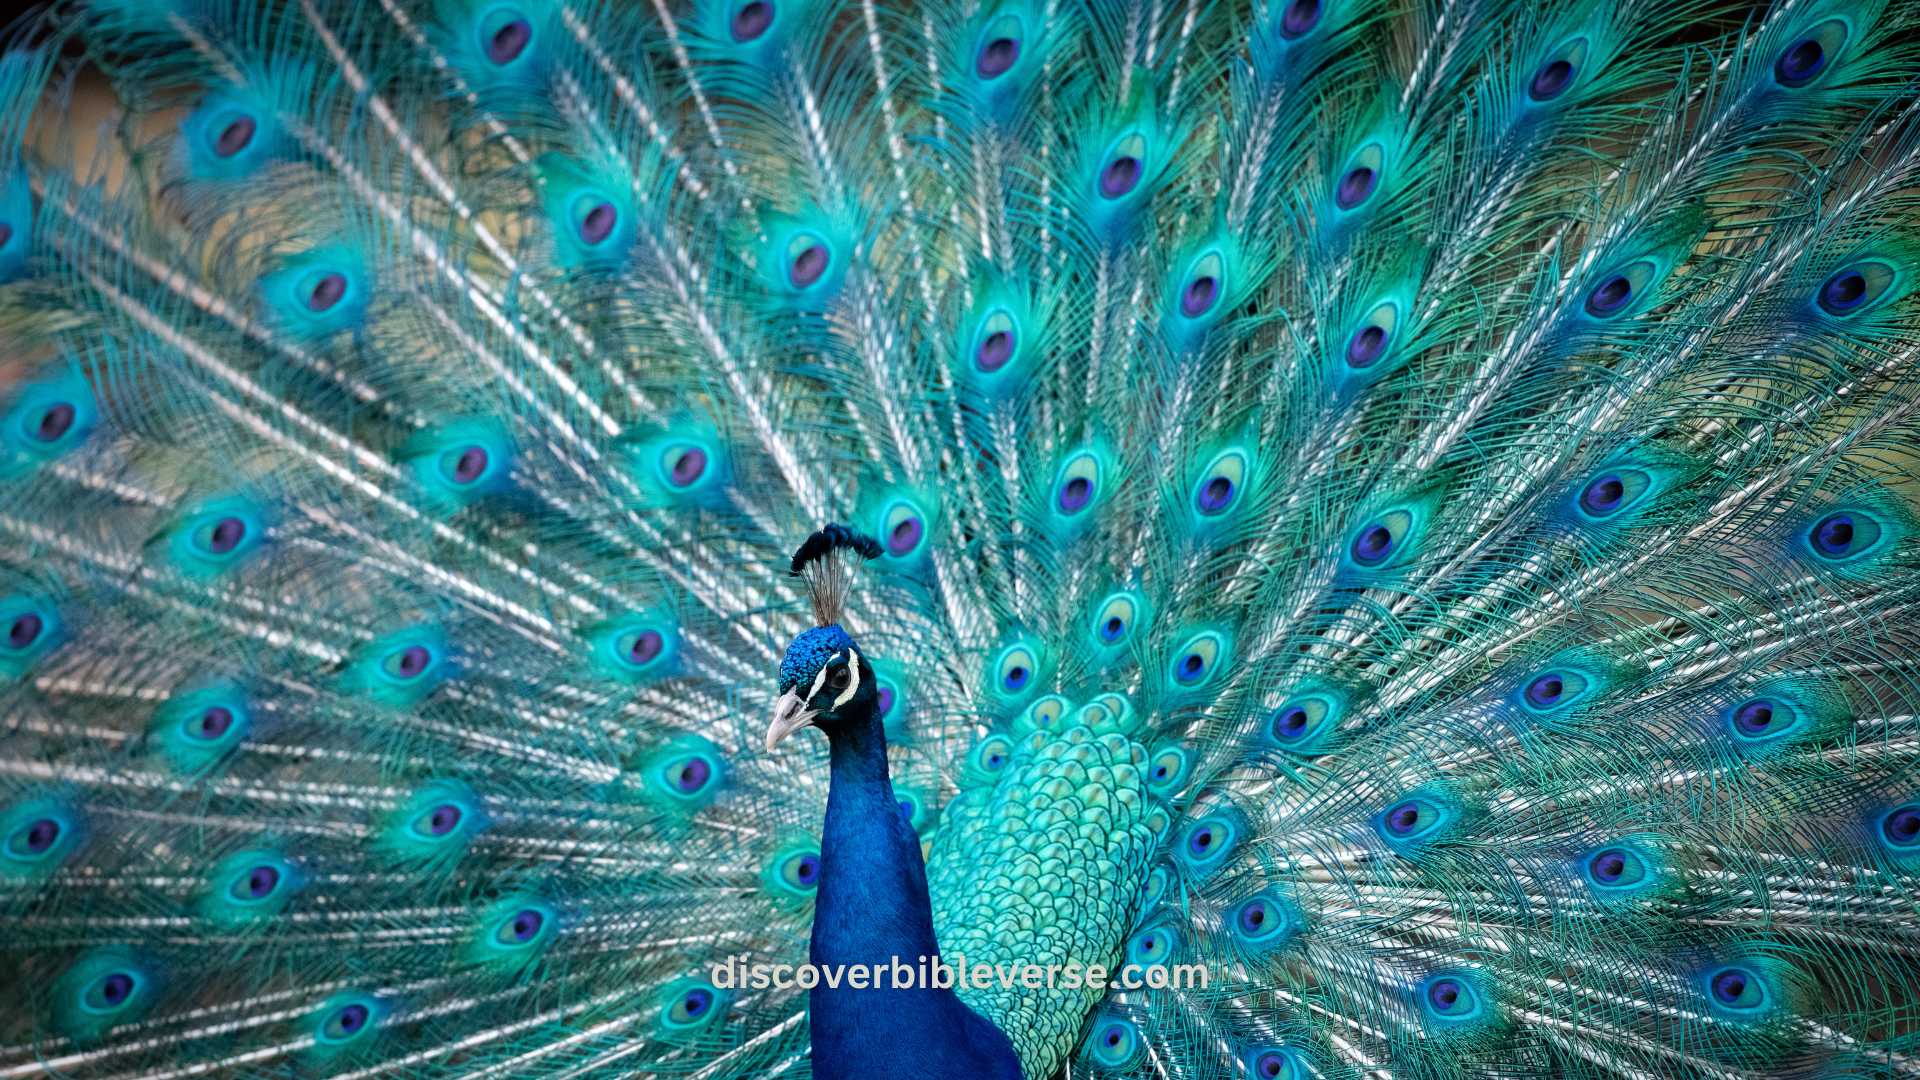 meaning of peacock in bible